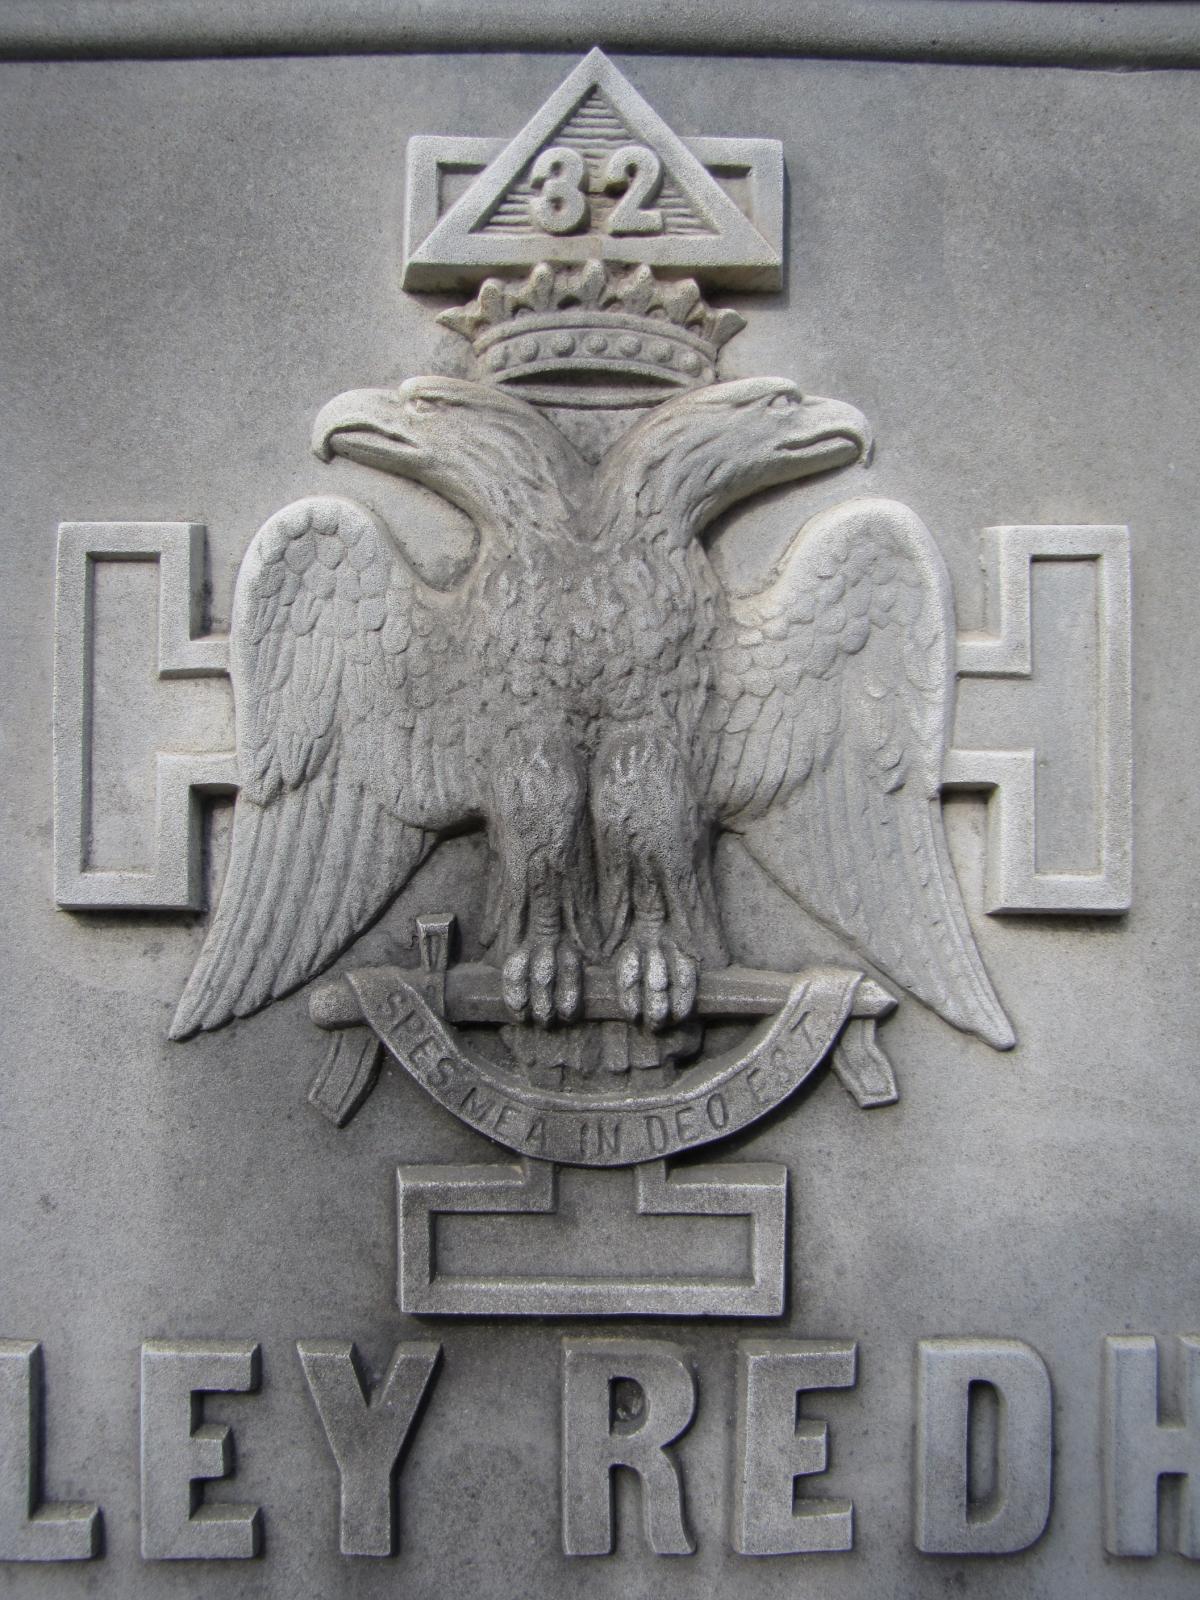 OK, Grove, Headstone Symbols and Meanings, Double Headed Eagle